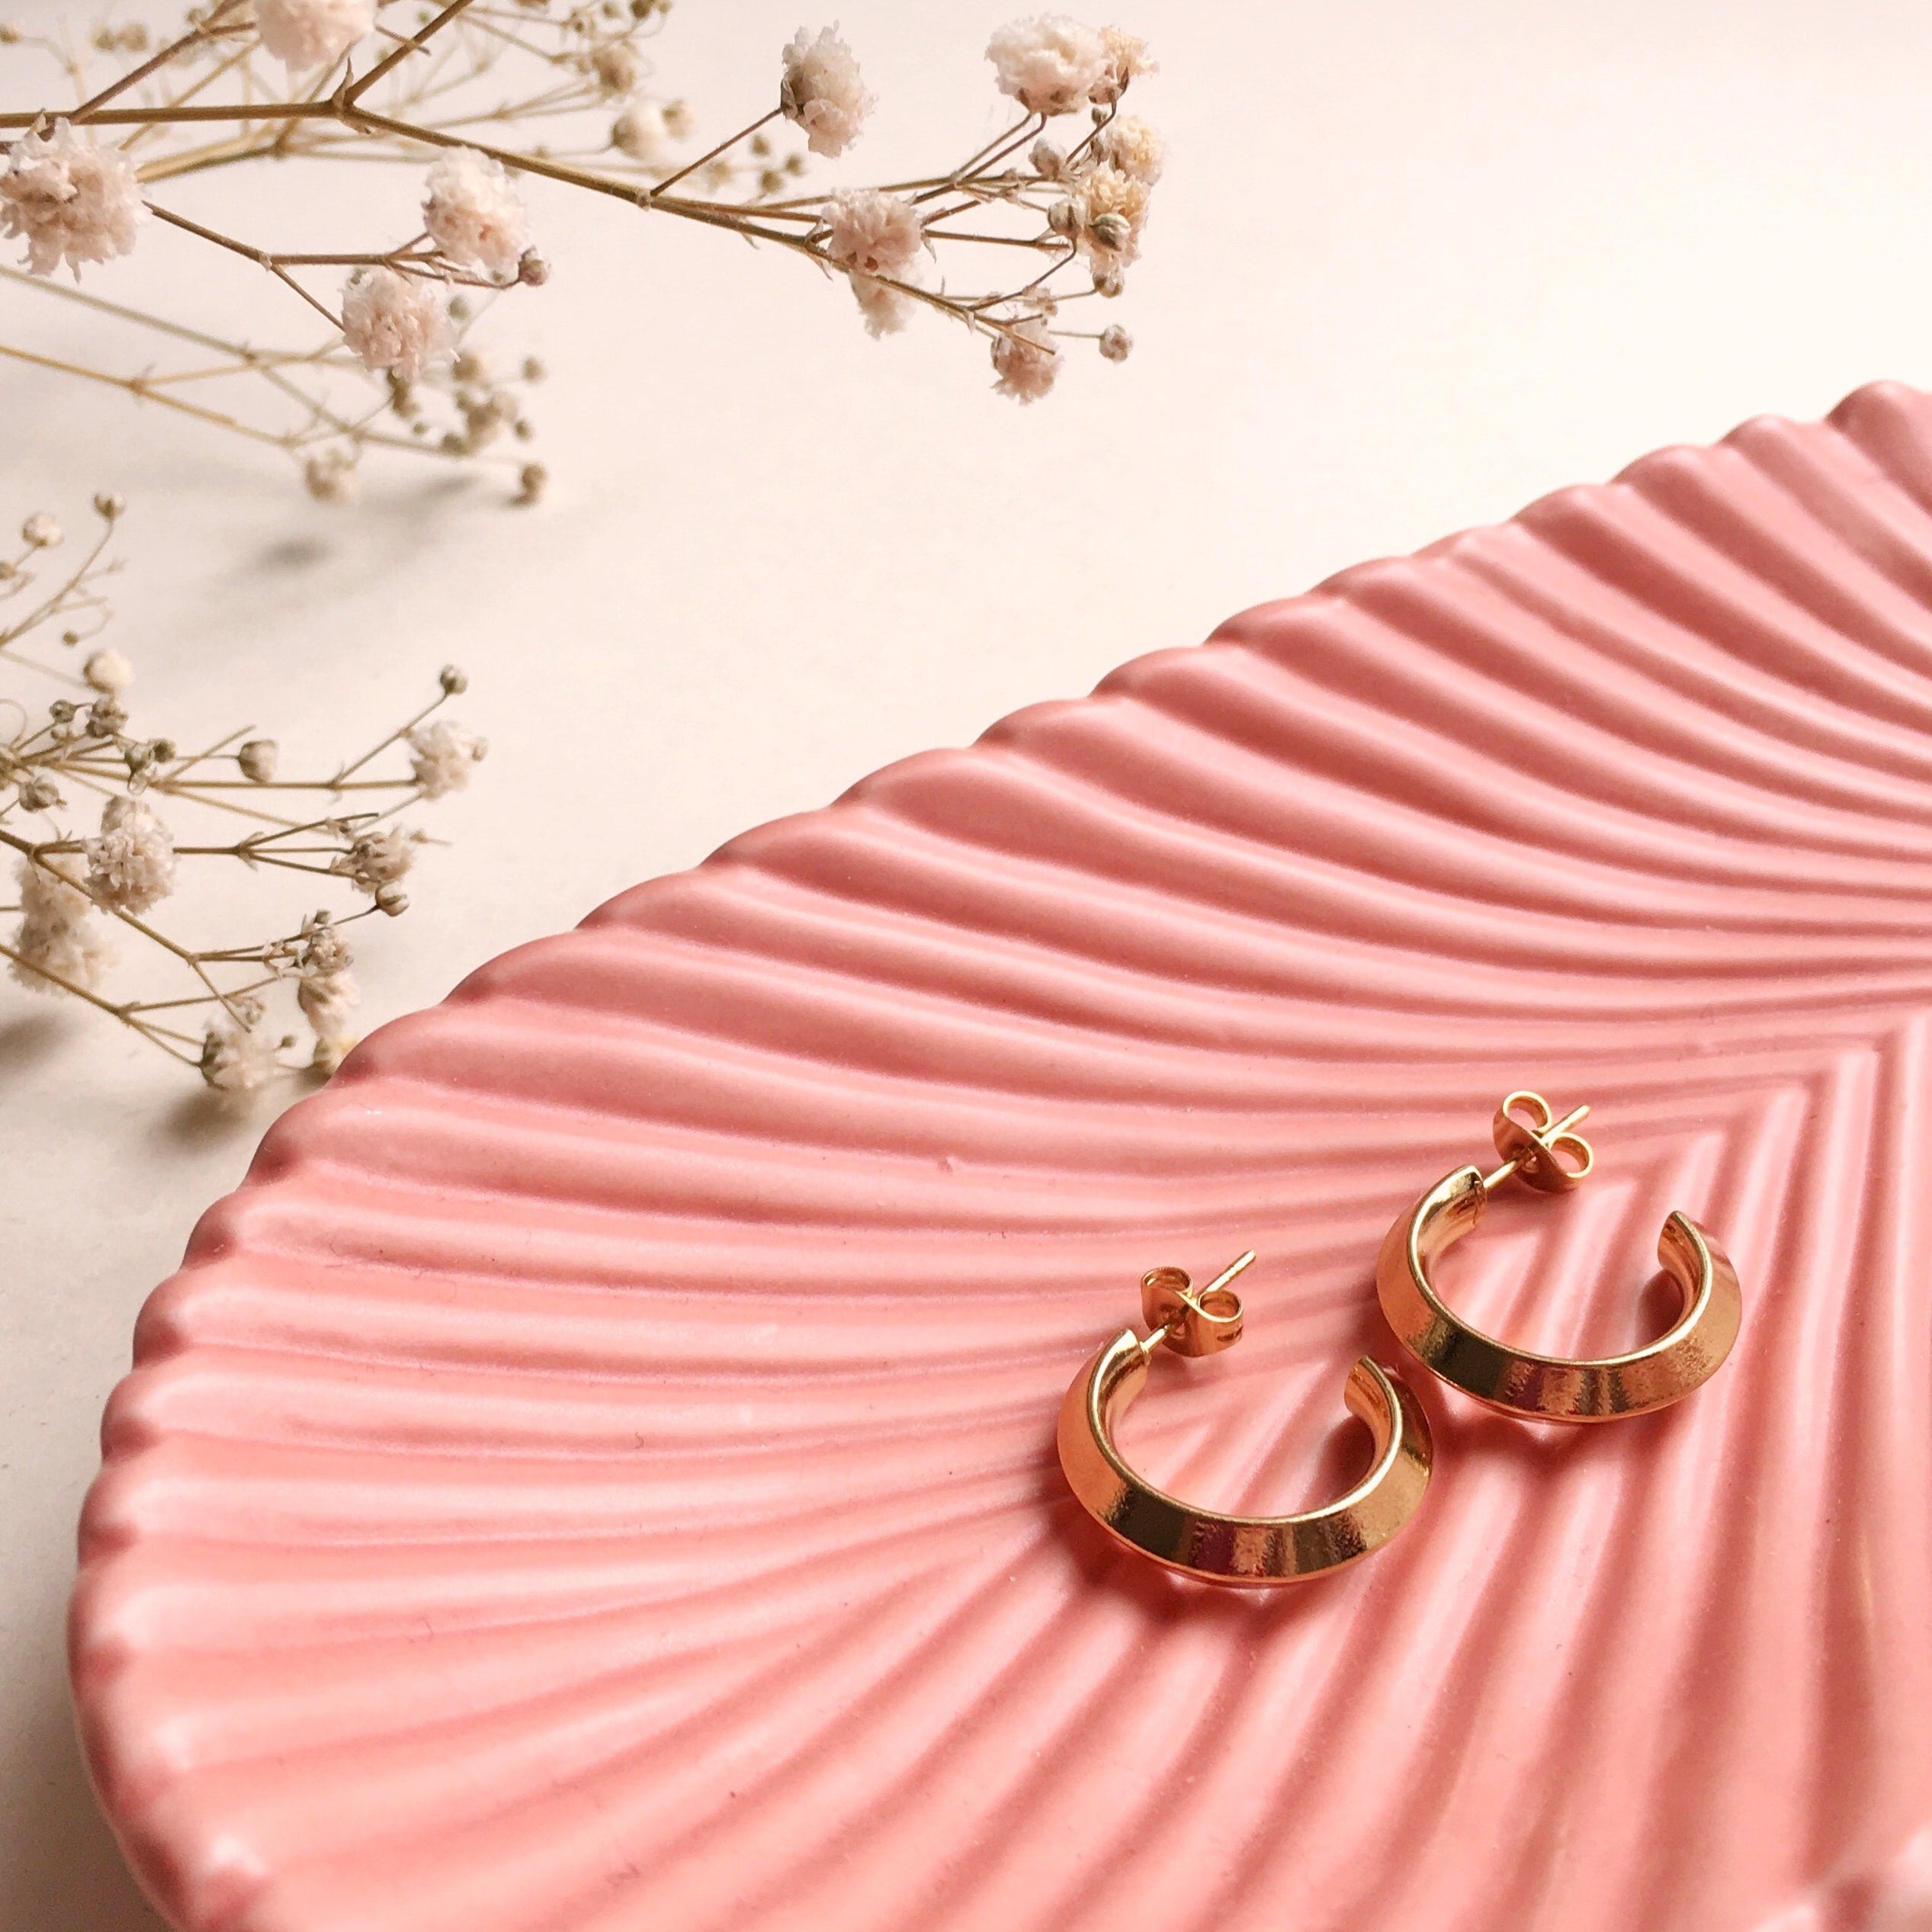 A pair of earrings sitting in a peach dish. 